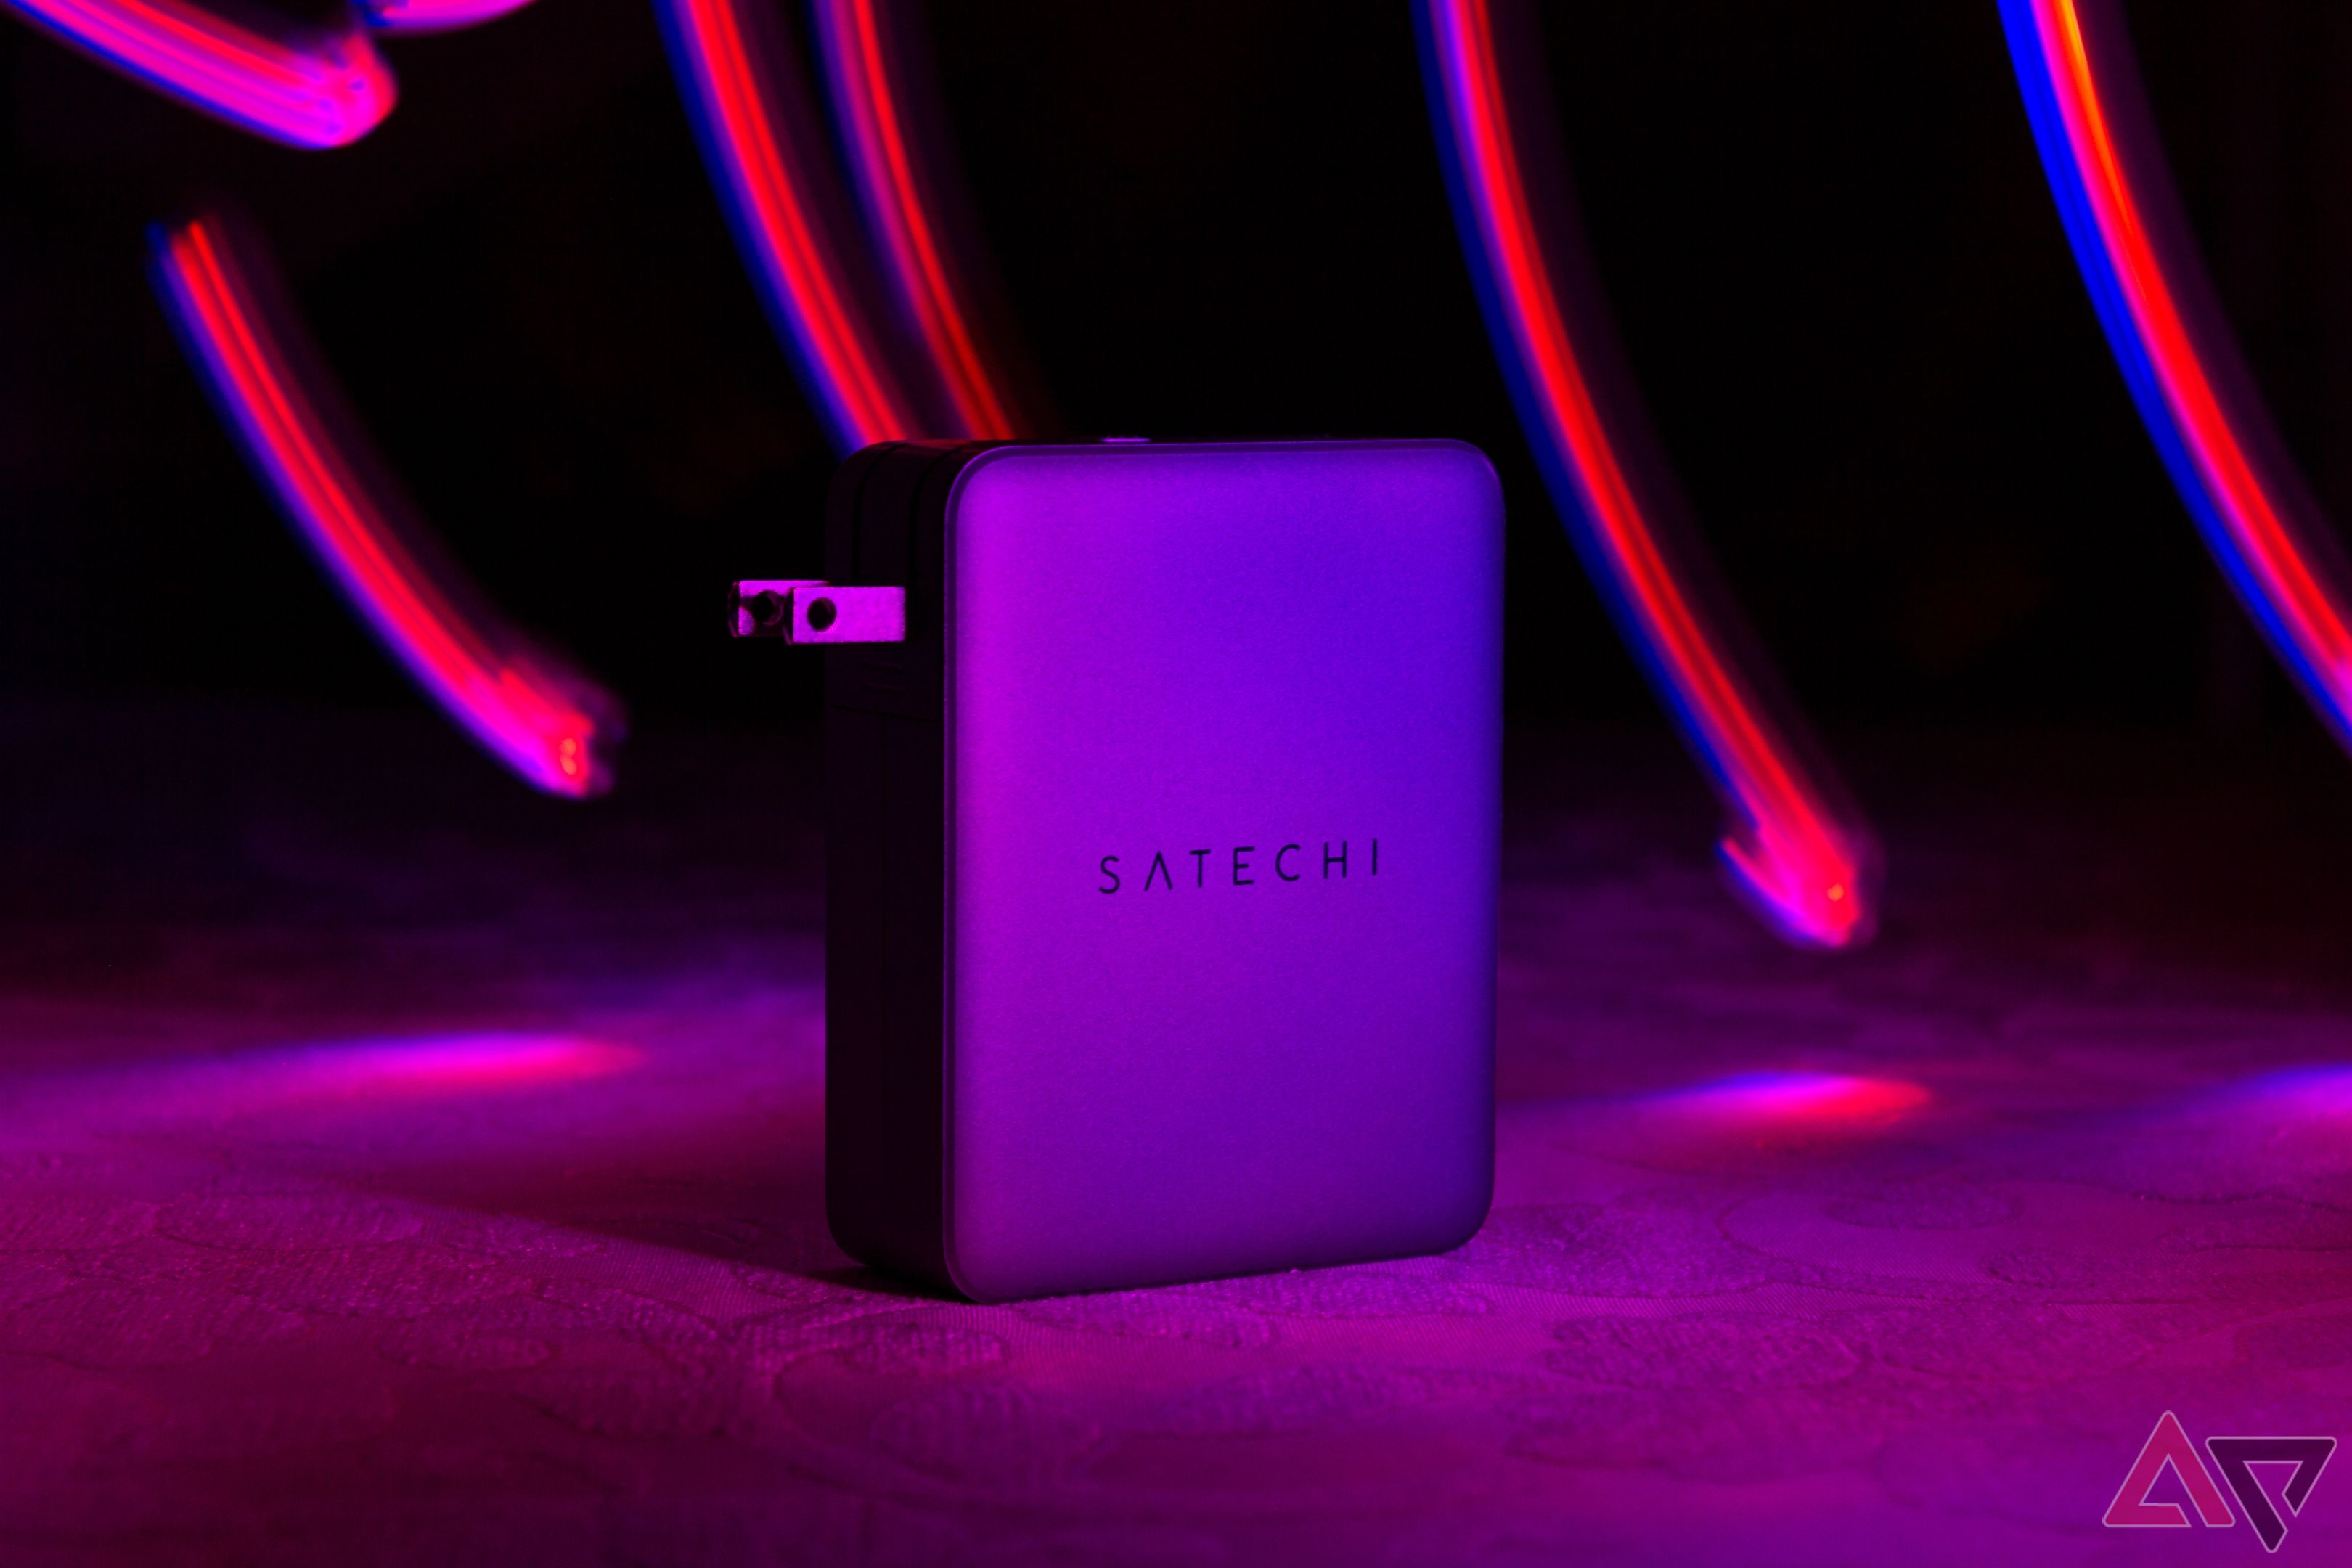 Satechi-145-travelcharger-review-06-1